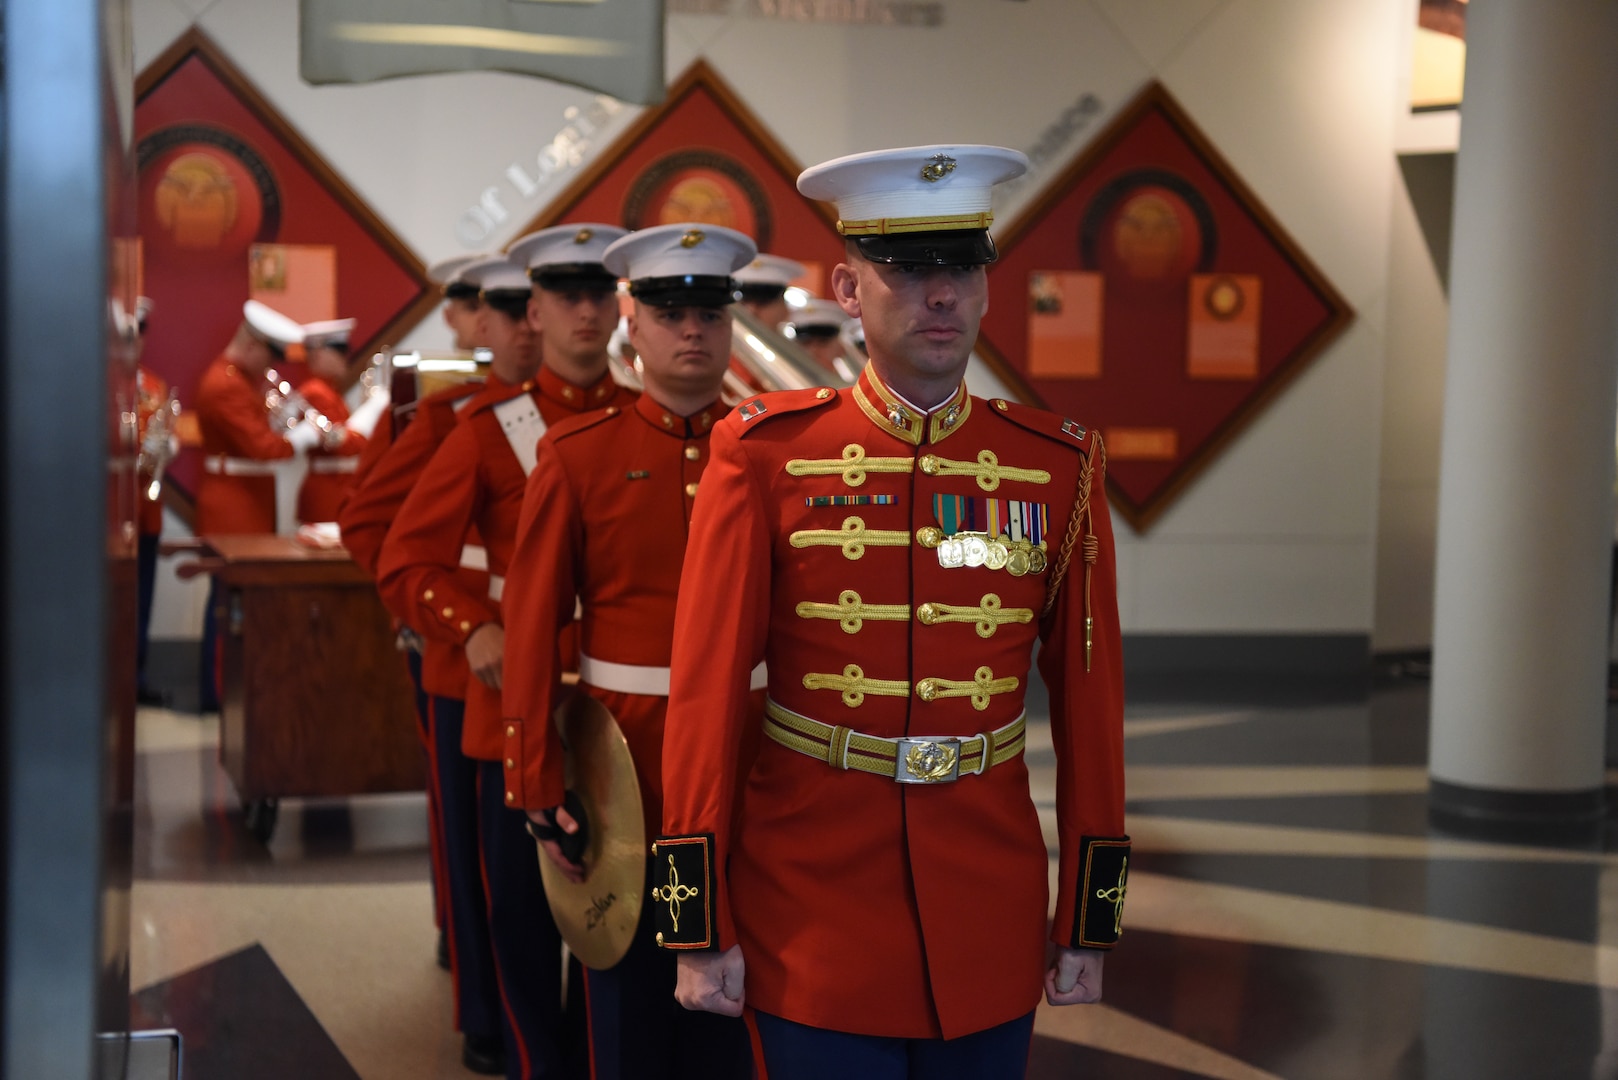 Marine band in dress red jackets